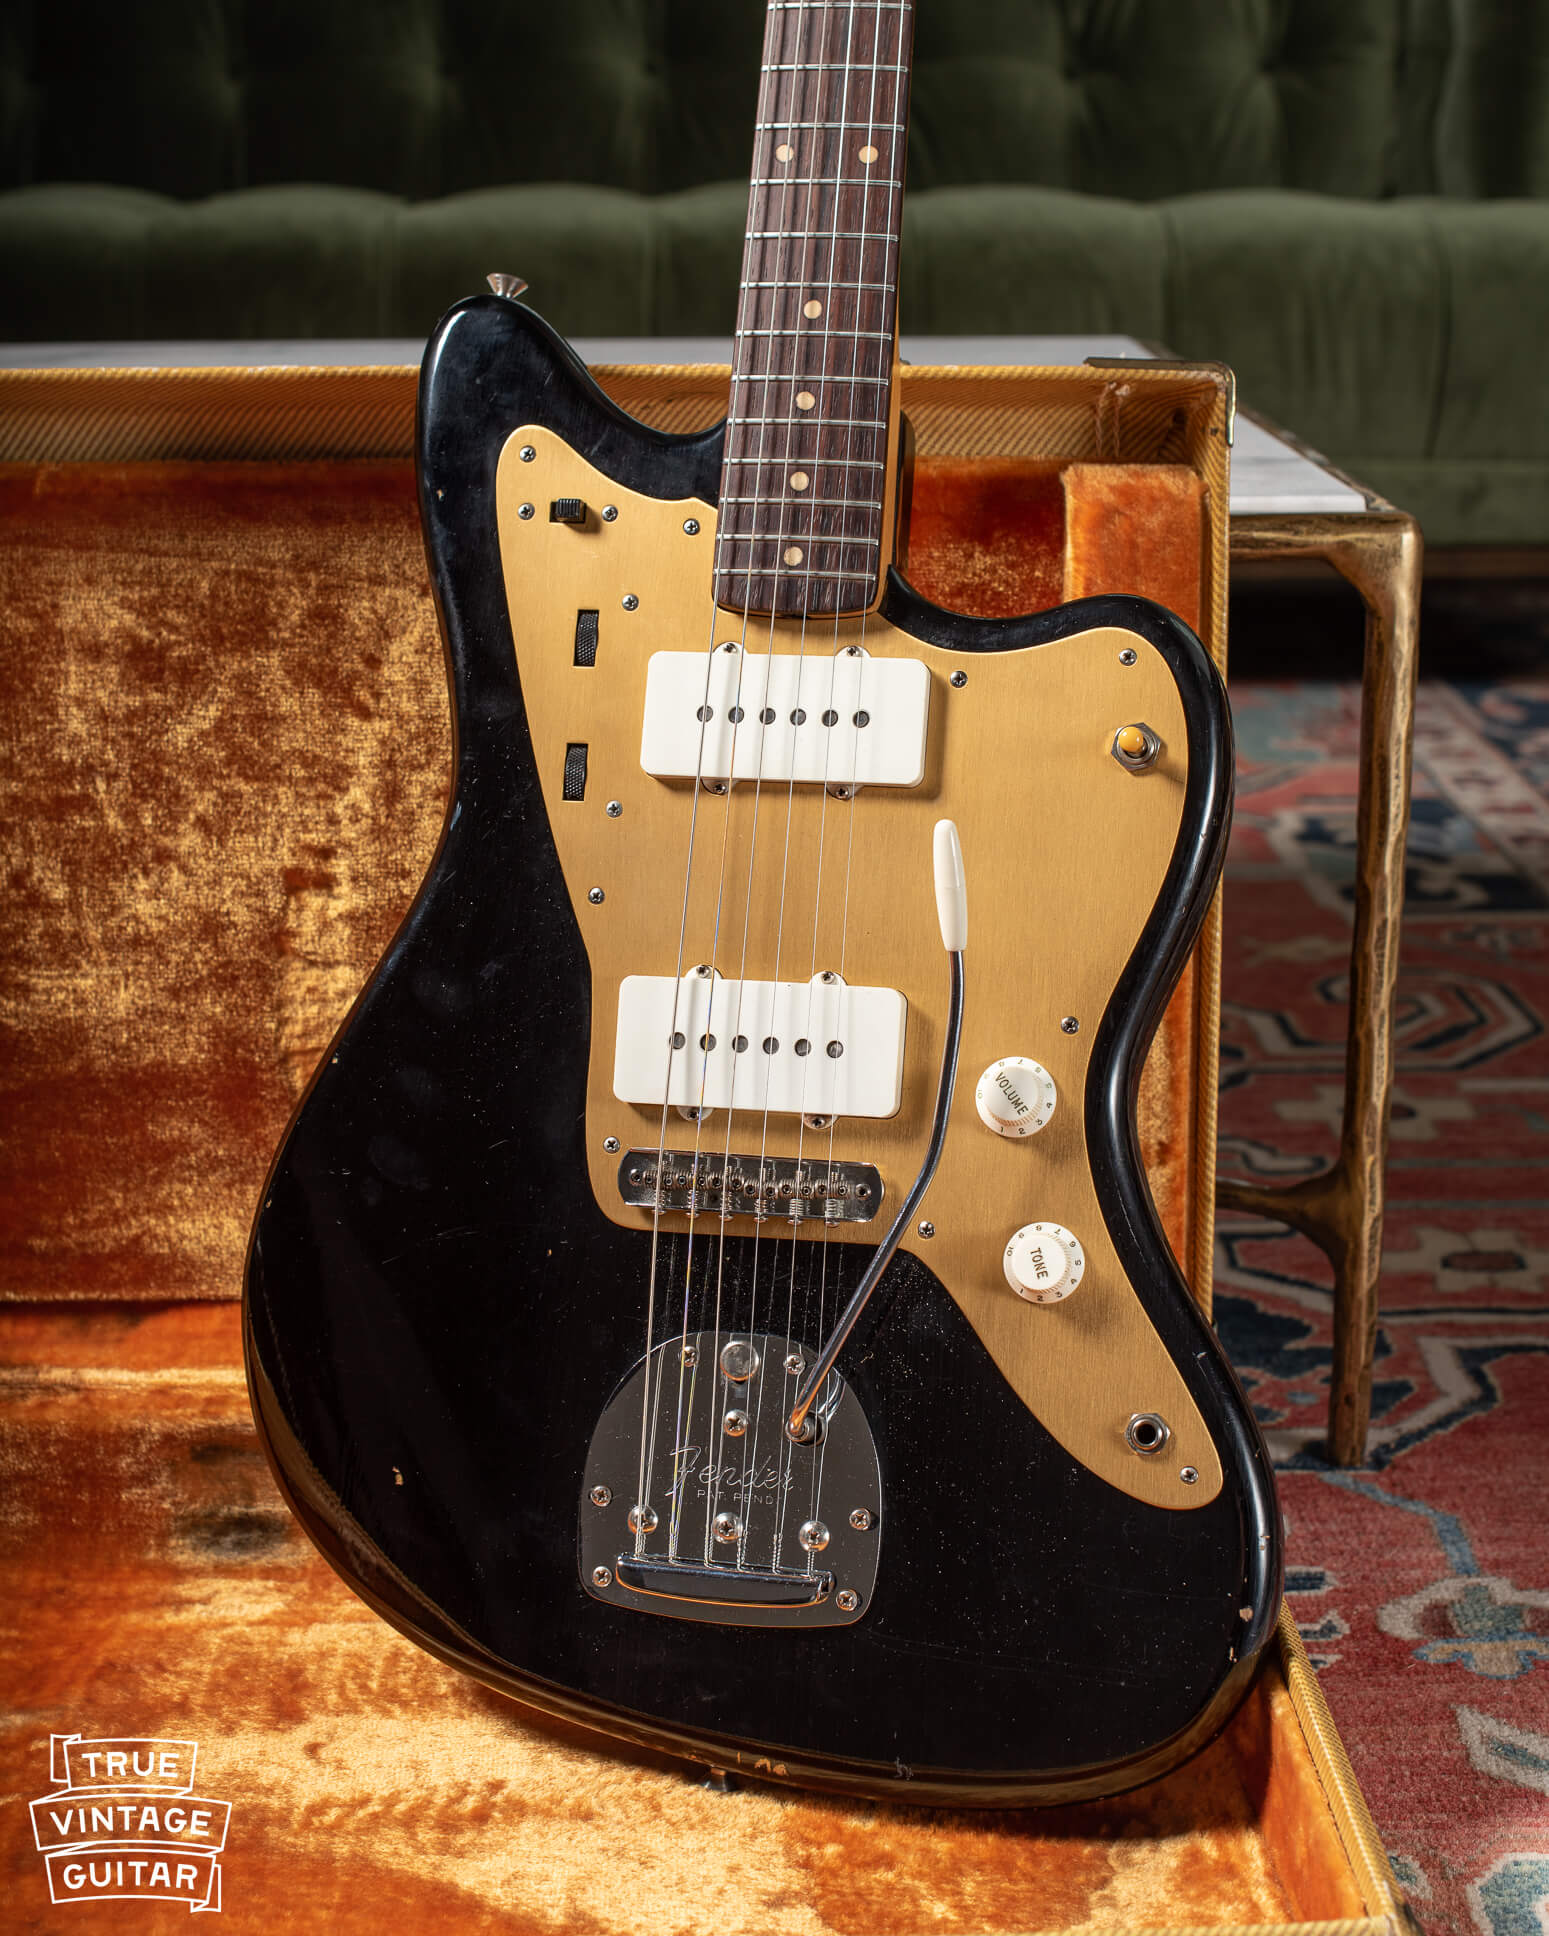 Fender Jazzmaster Black with gold pickguard made in 1959